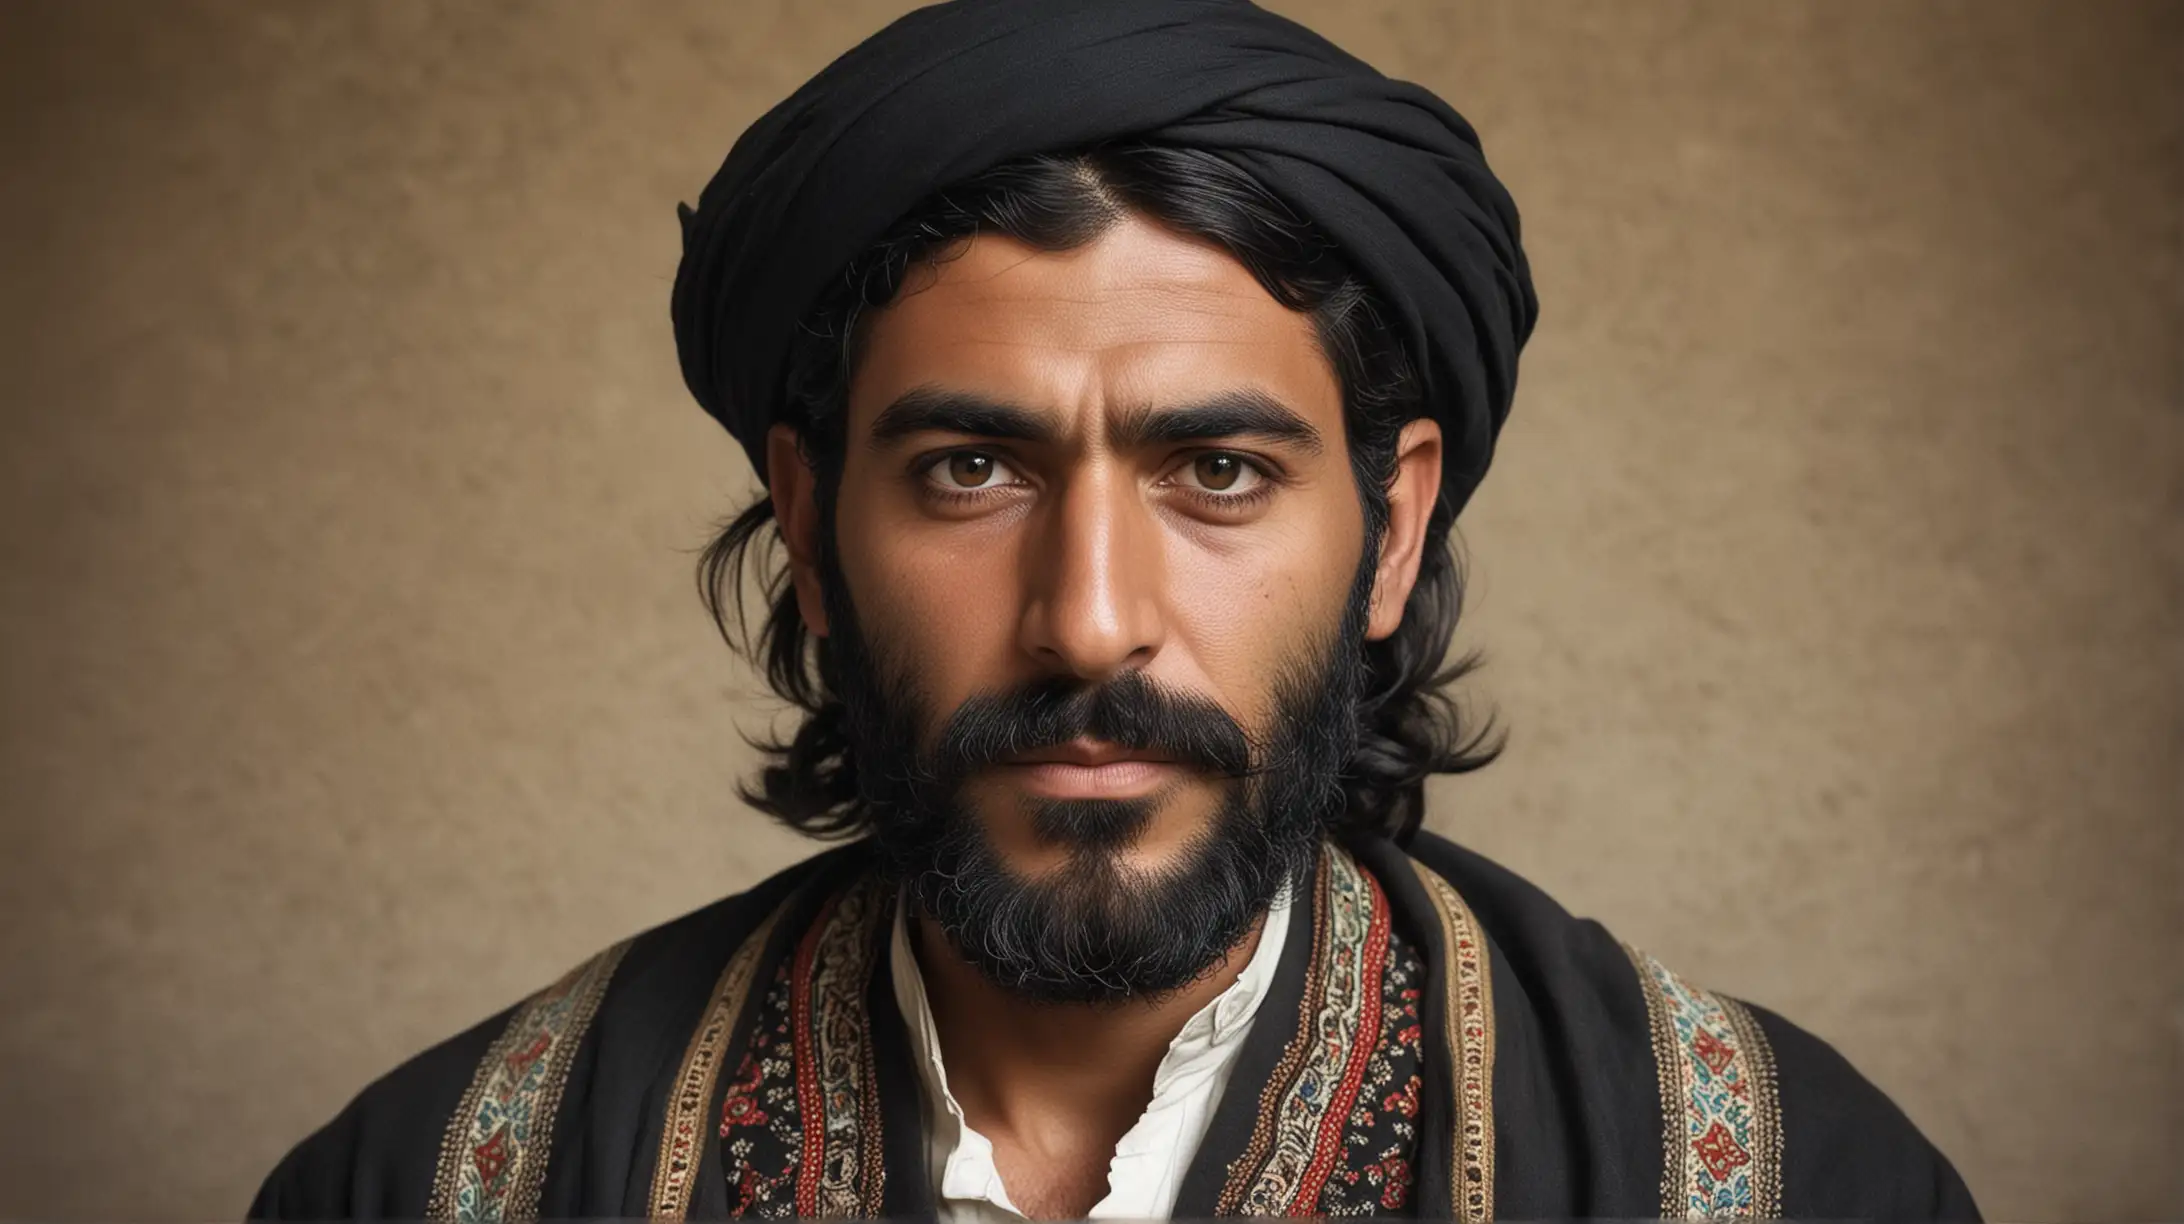 Portrait of a Courageous 19th Century Iranian Tribal Man in Traditional Dress